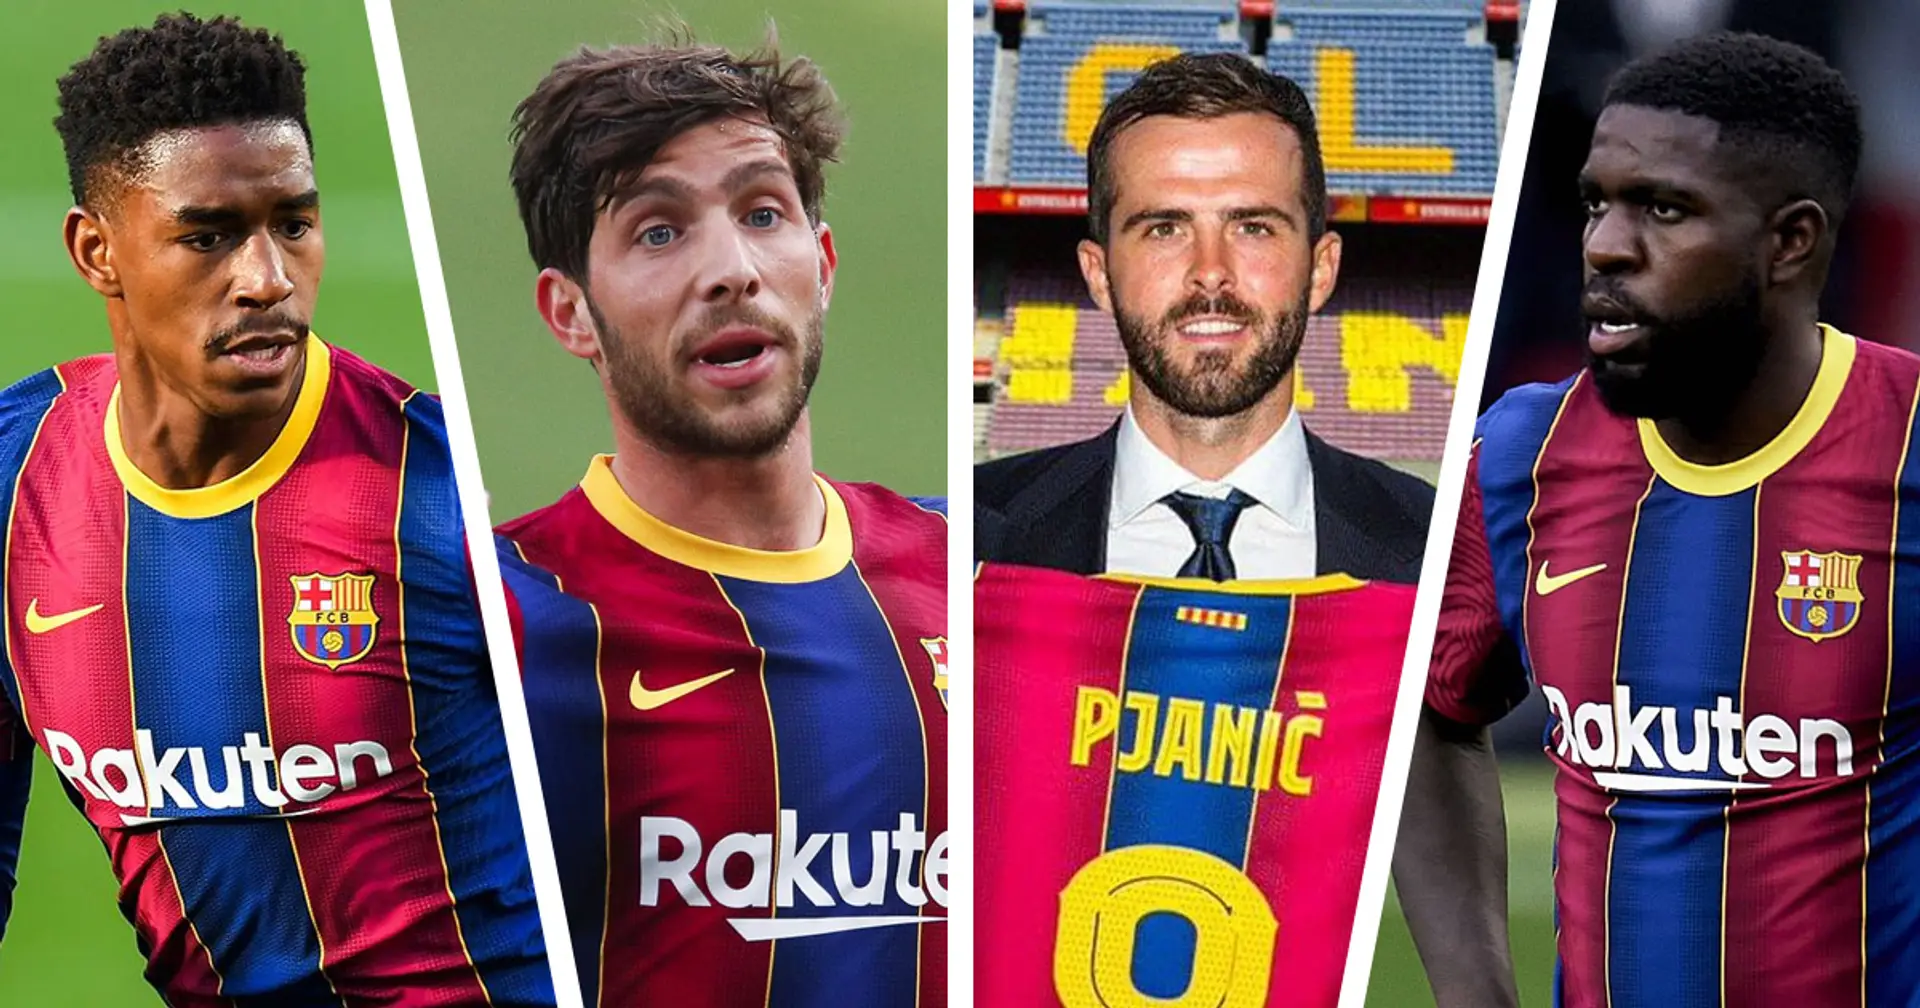 Revealed: How much money could Barca save in wages by selling fringes this summer